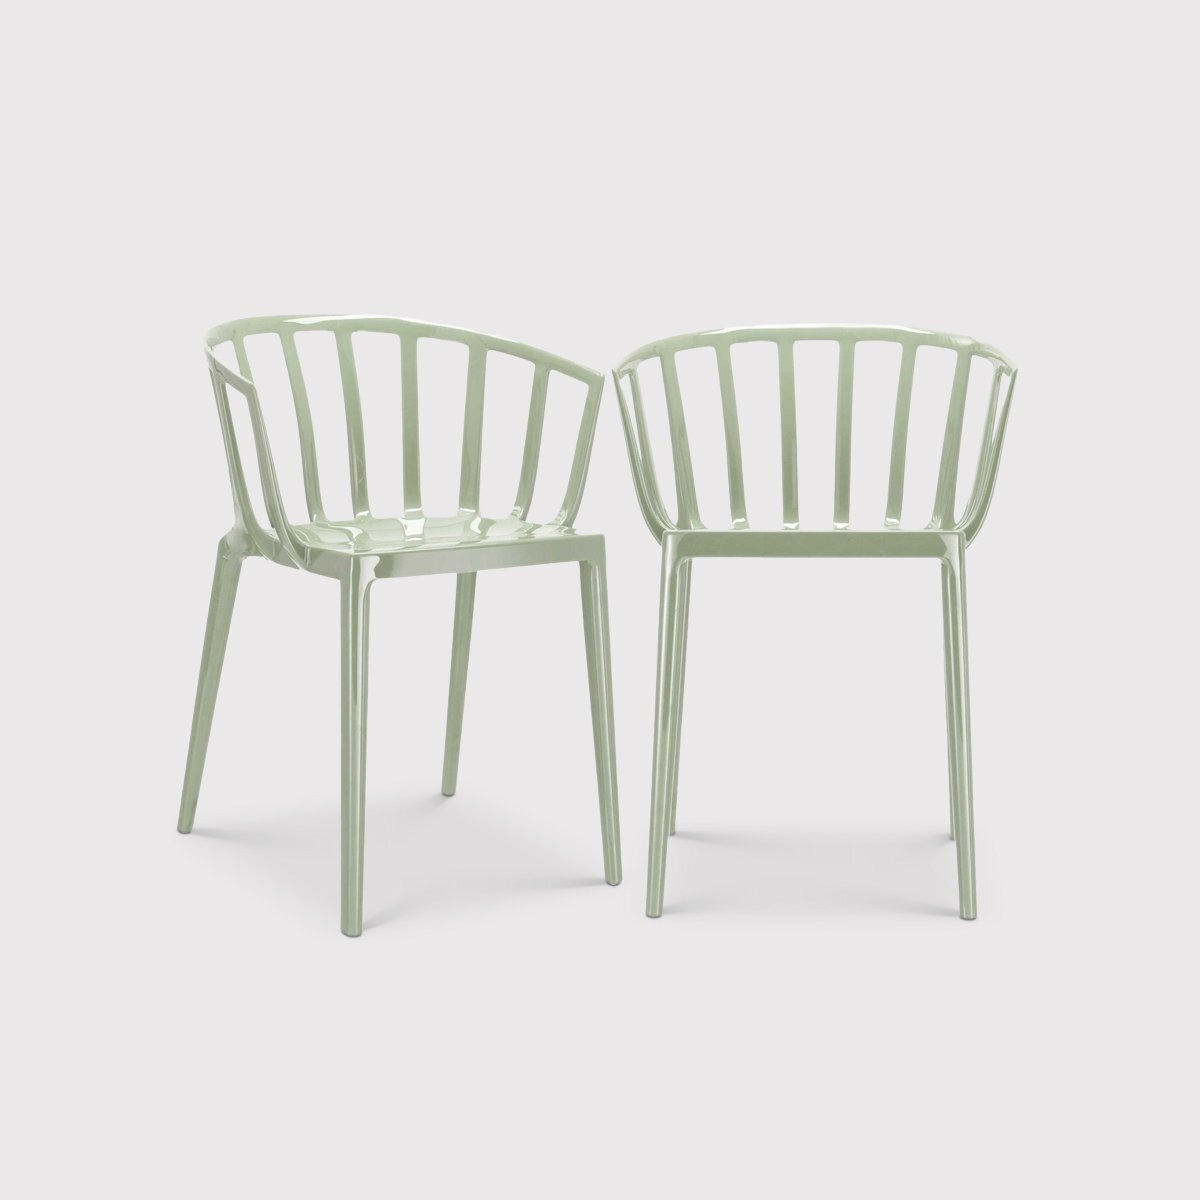 Pair of Kartell Venice Dining Chairs, Green Plastic - Kartell - image 1